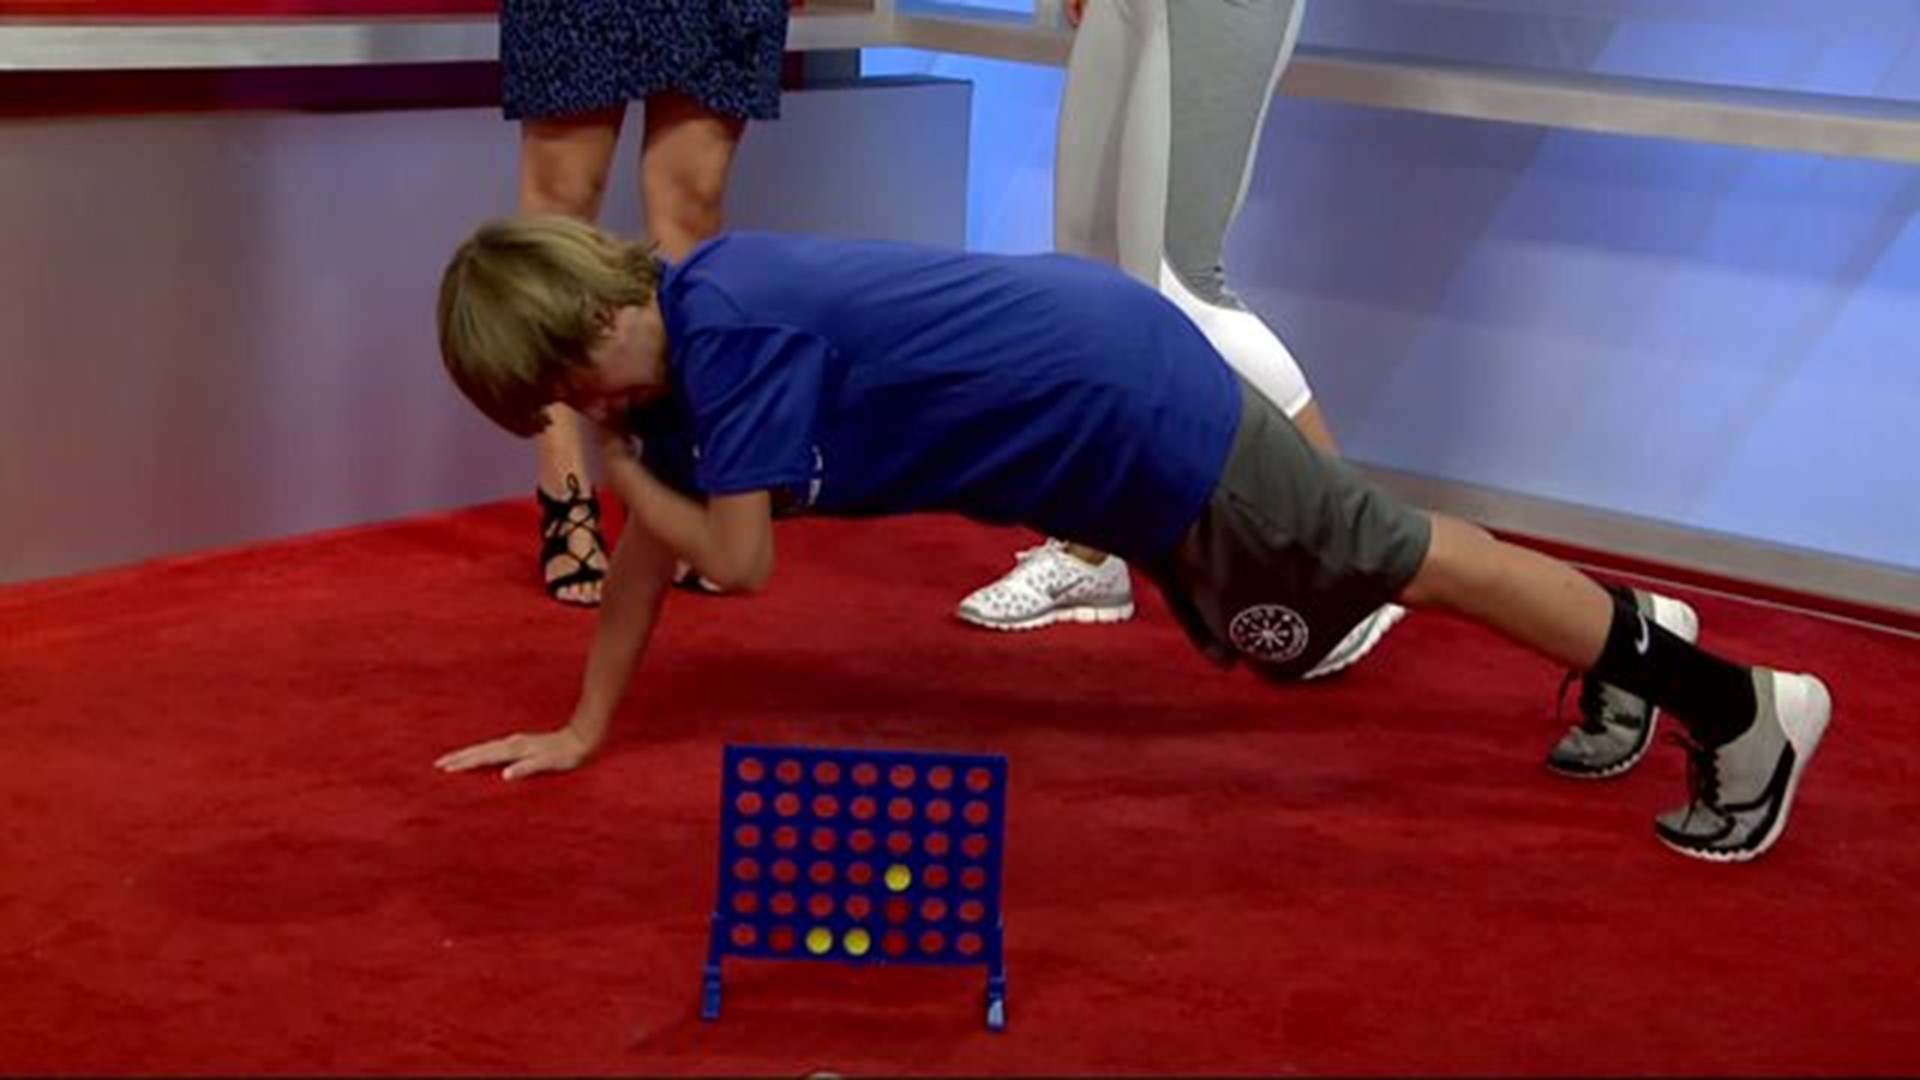 Be Well: Connect Four helps add fun to workouts